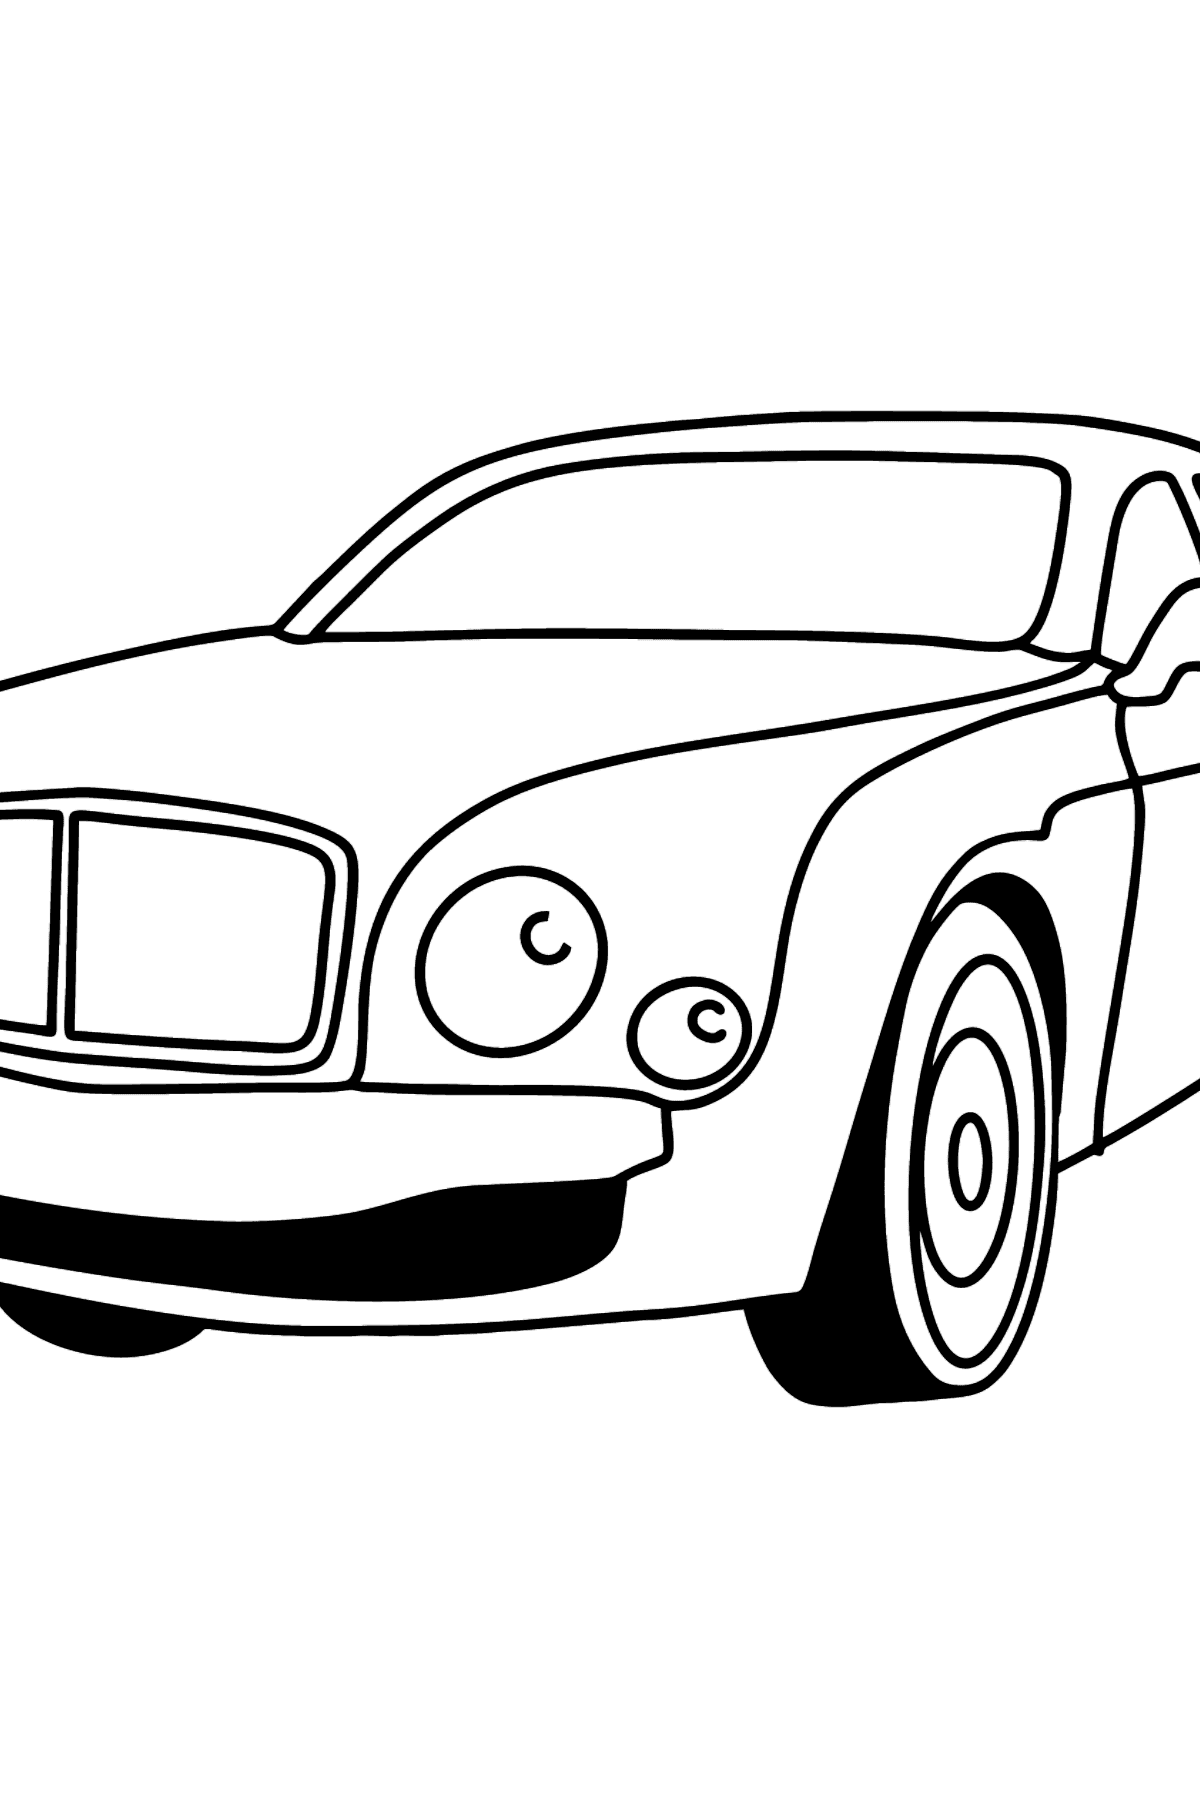 Bentley Car Coloring Page - Coloring Pages for Kids